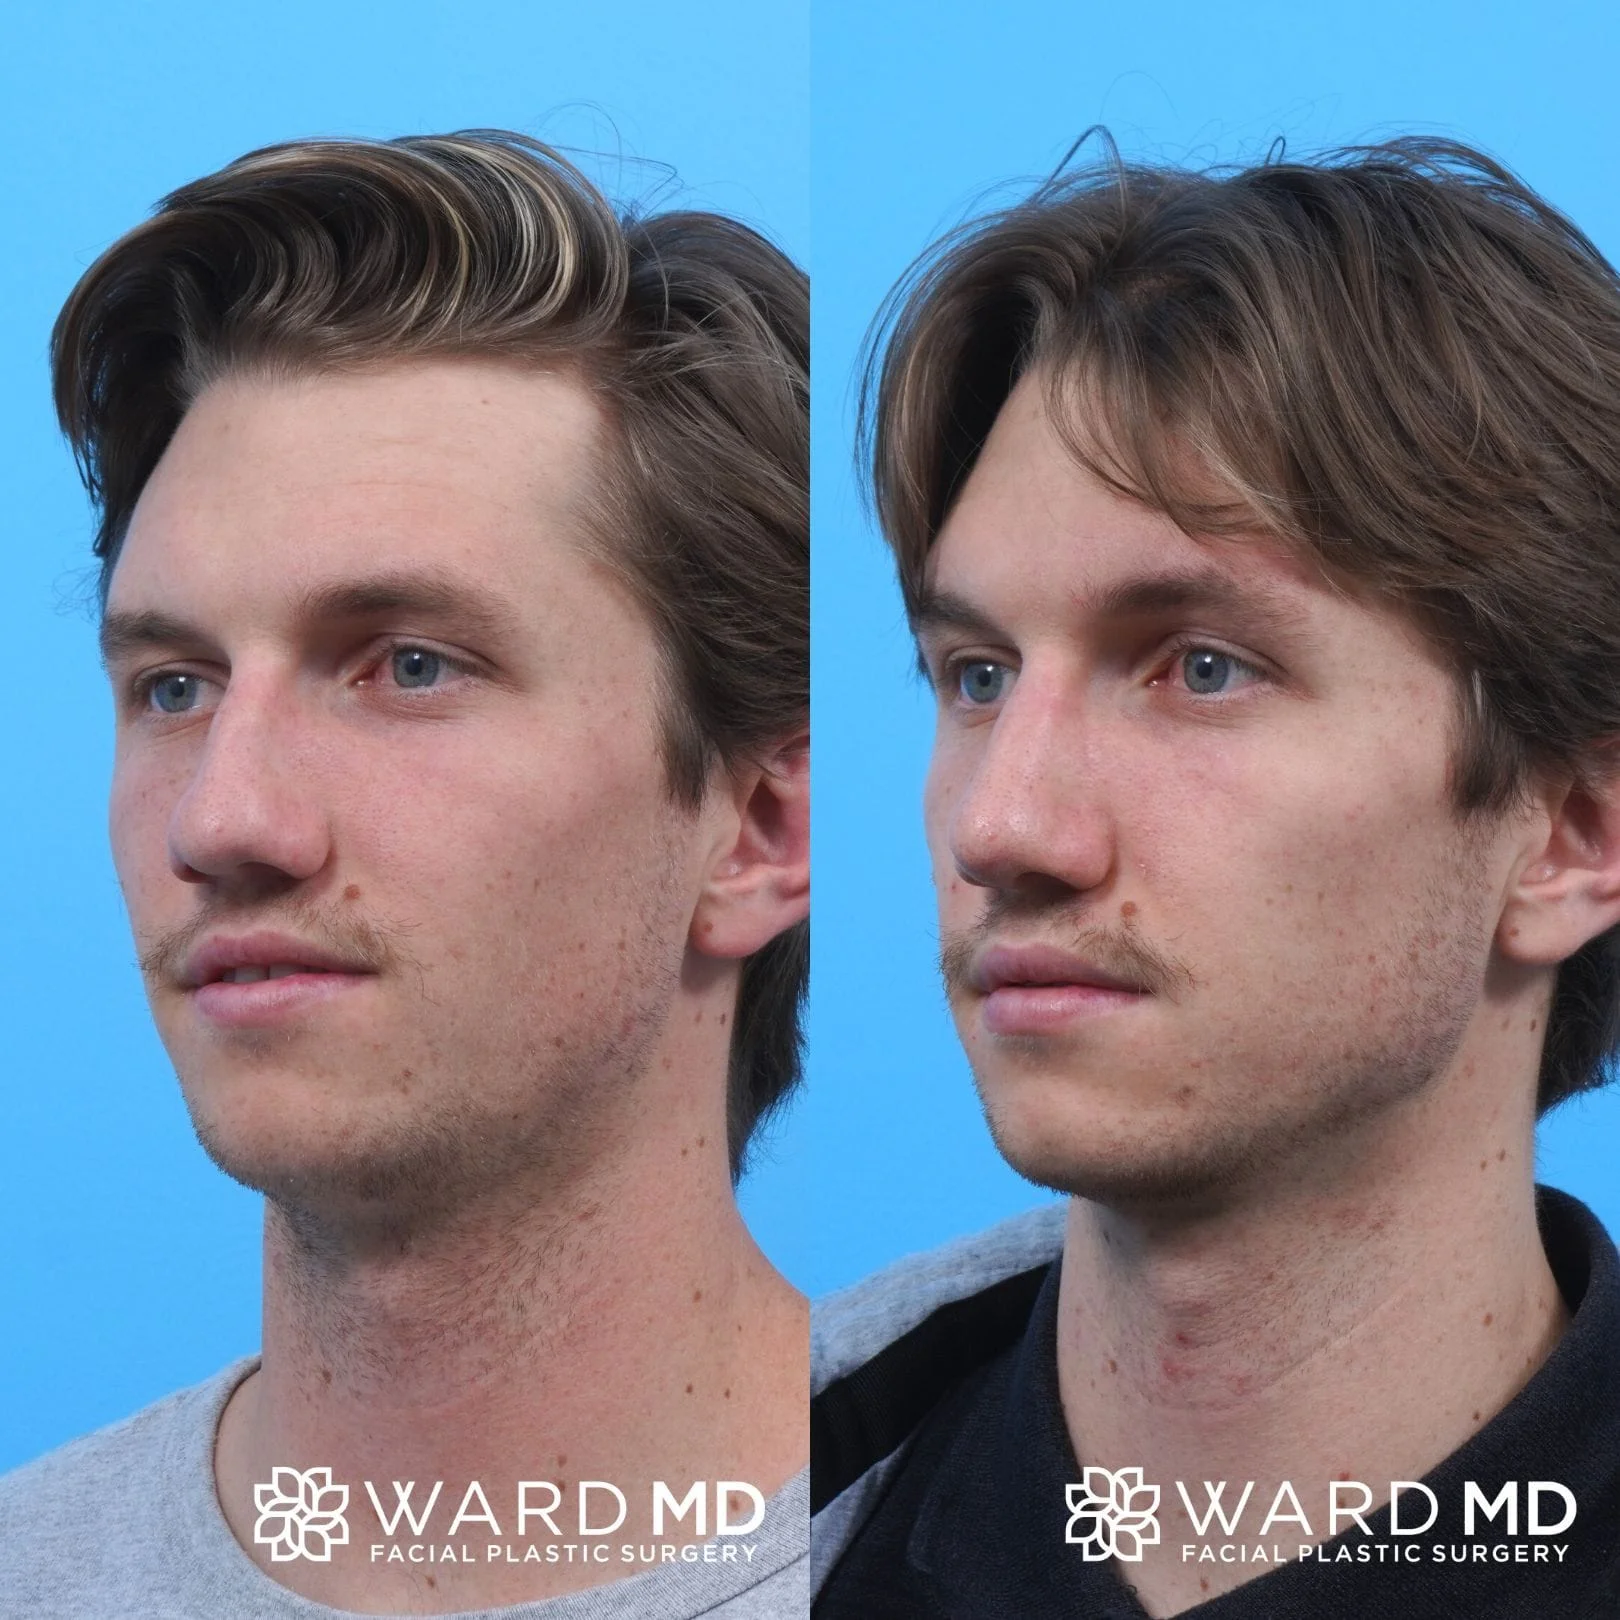 Male rhinoplasty before and after image.